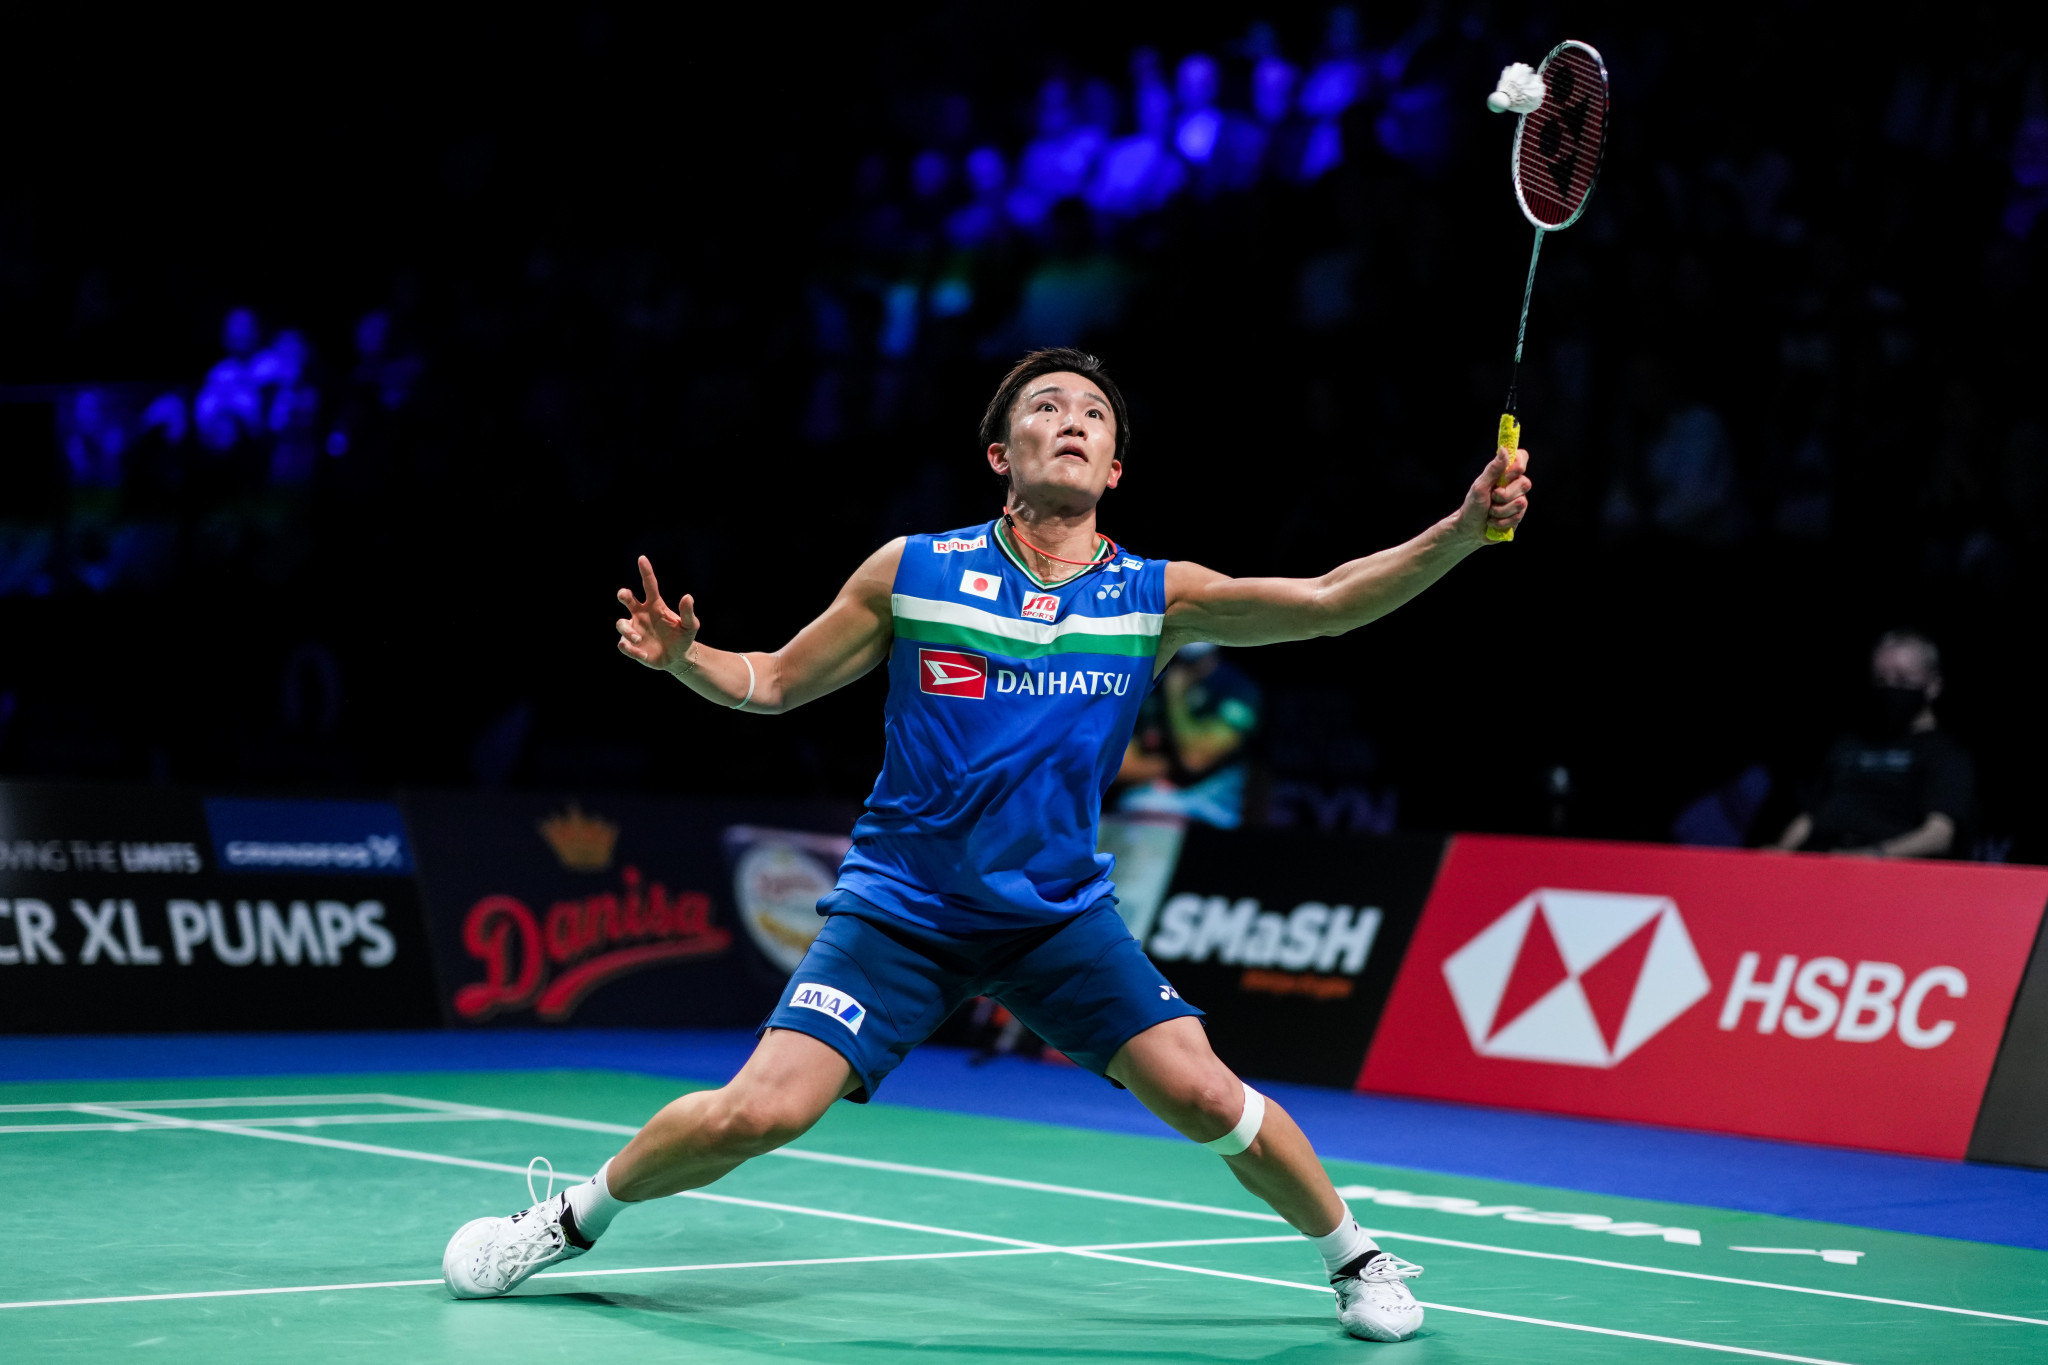 Kento Momota of Japan will face Denmark's Anders Antonsen in tomorrow's BWF Indonesia Masters men's singles final ©Getty Images